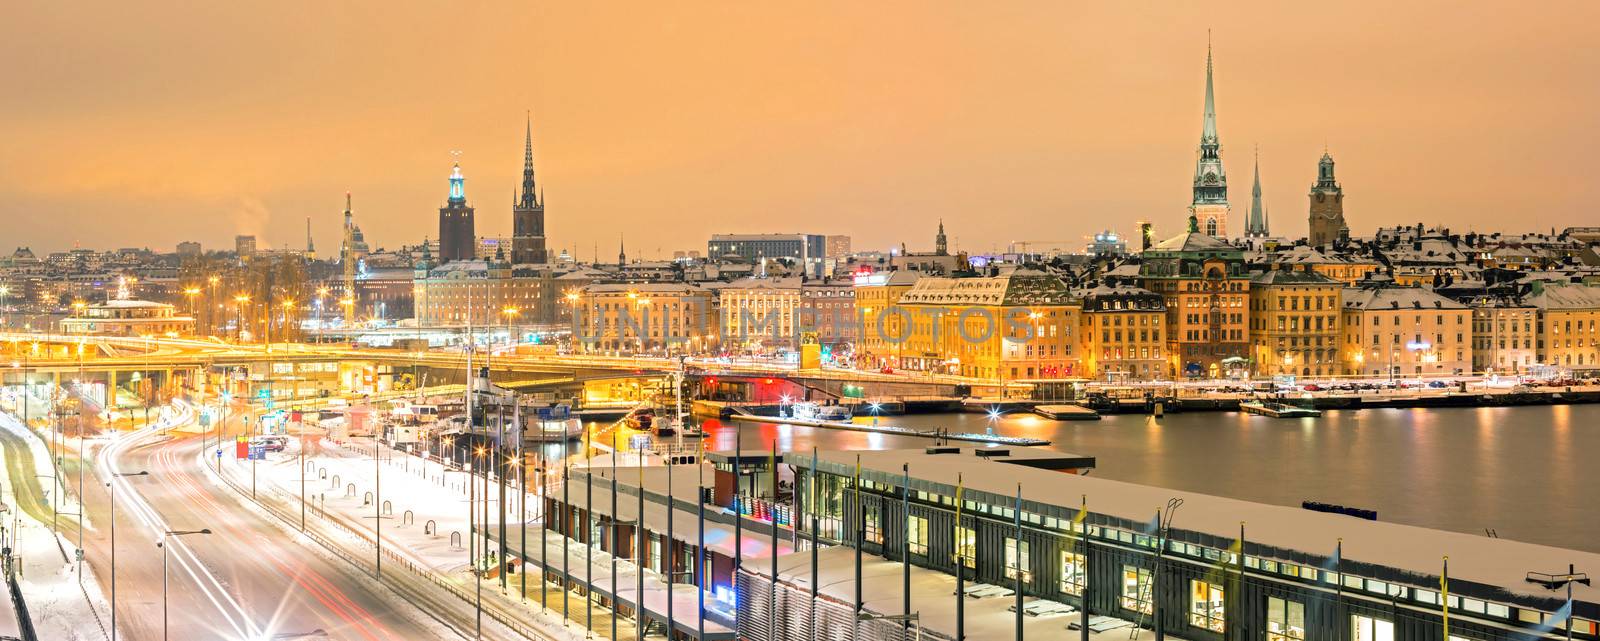 Stockholm Cityscape panorama by vichie81